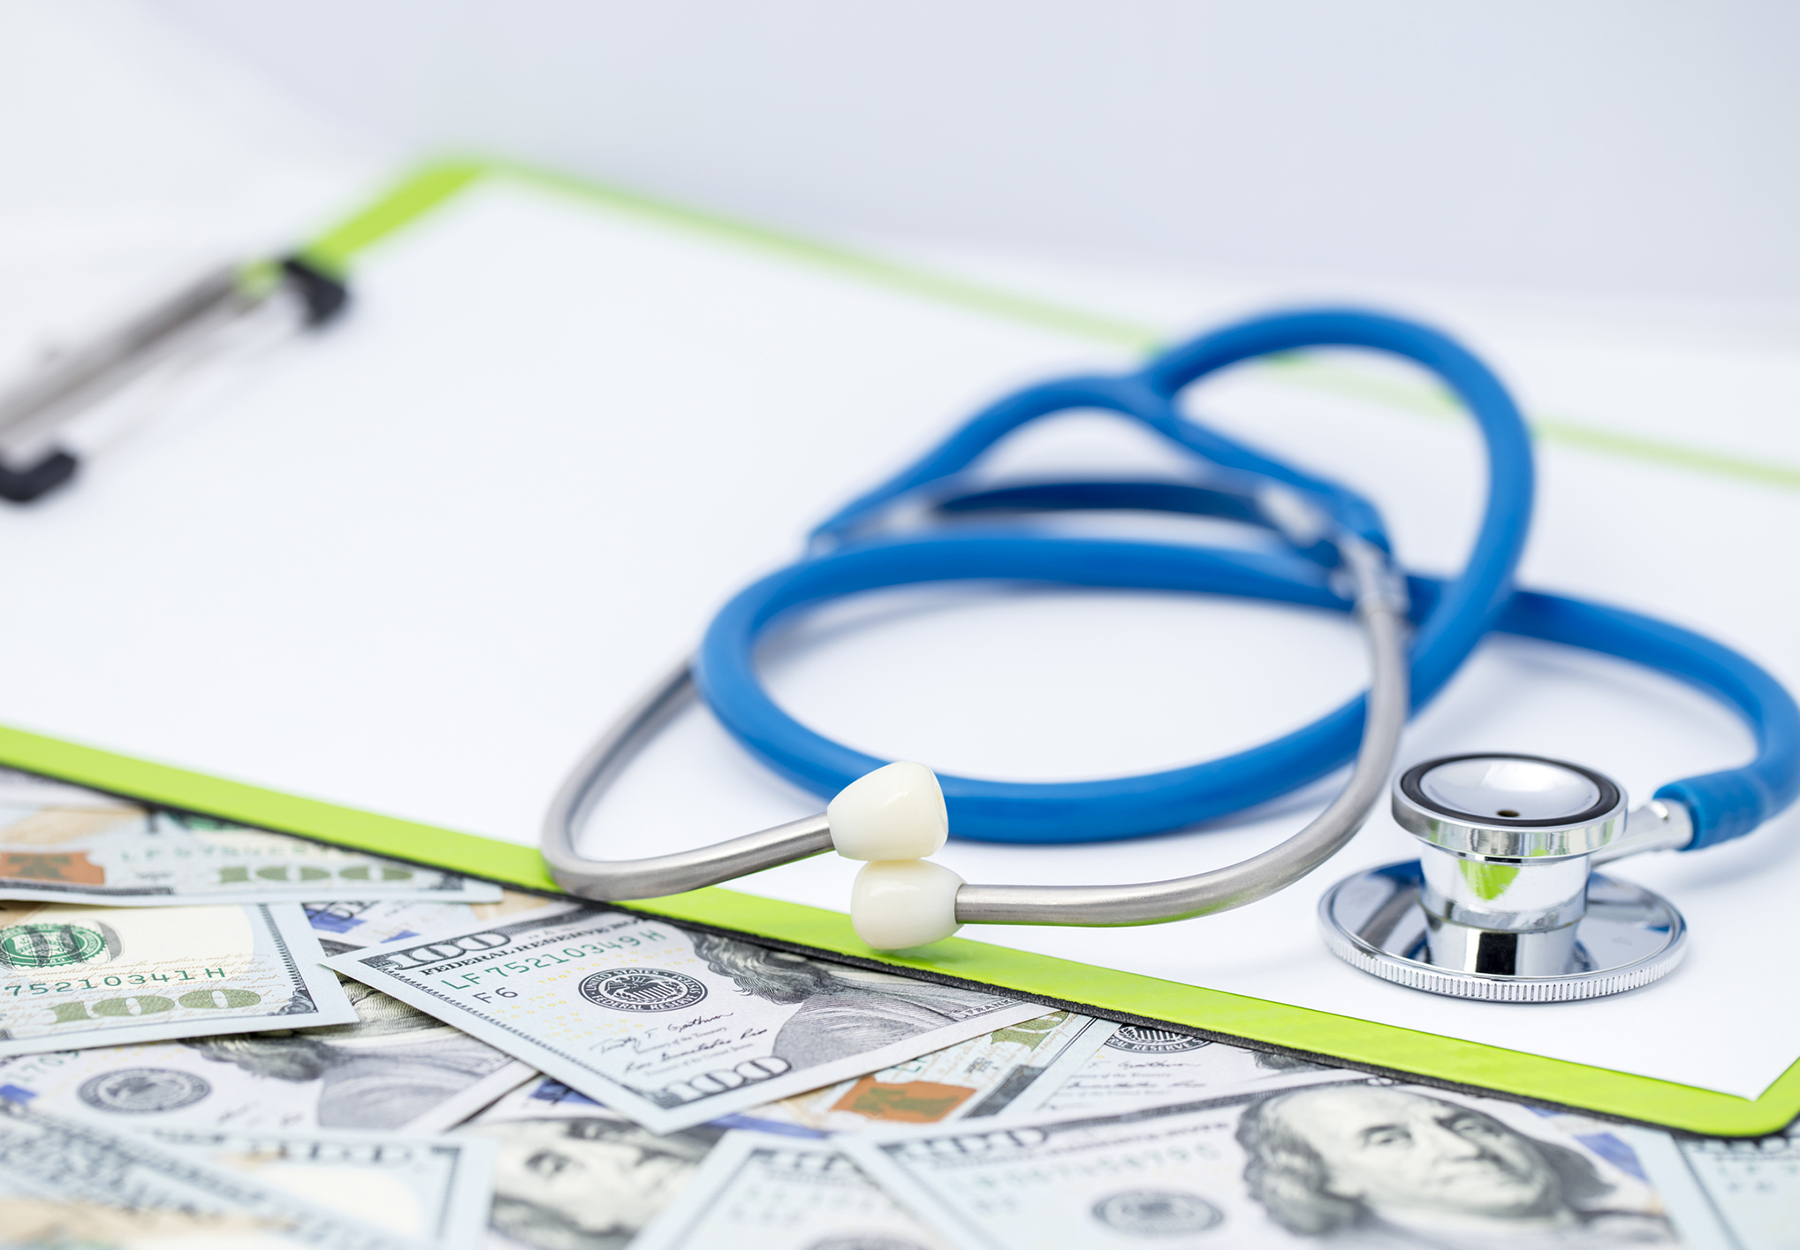 Close-up of a stethoscope and a clipboard on a heap US $100 dollars bills. Shallow depth of field. Stock photo.